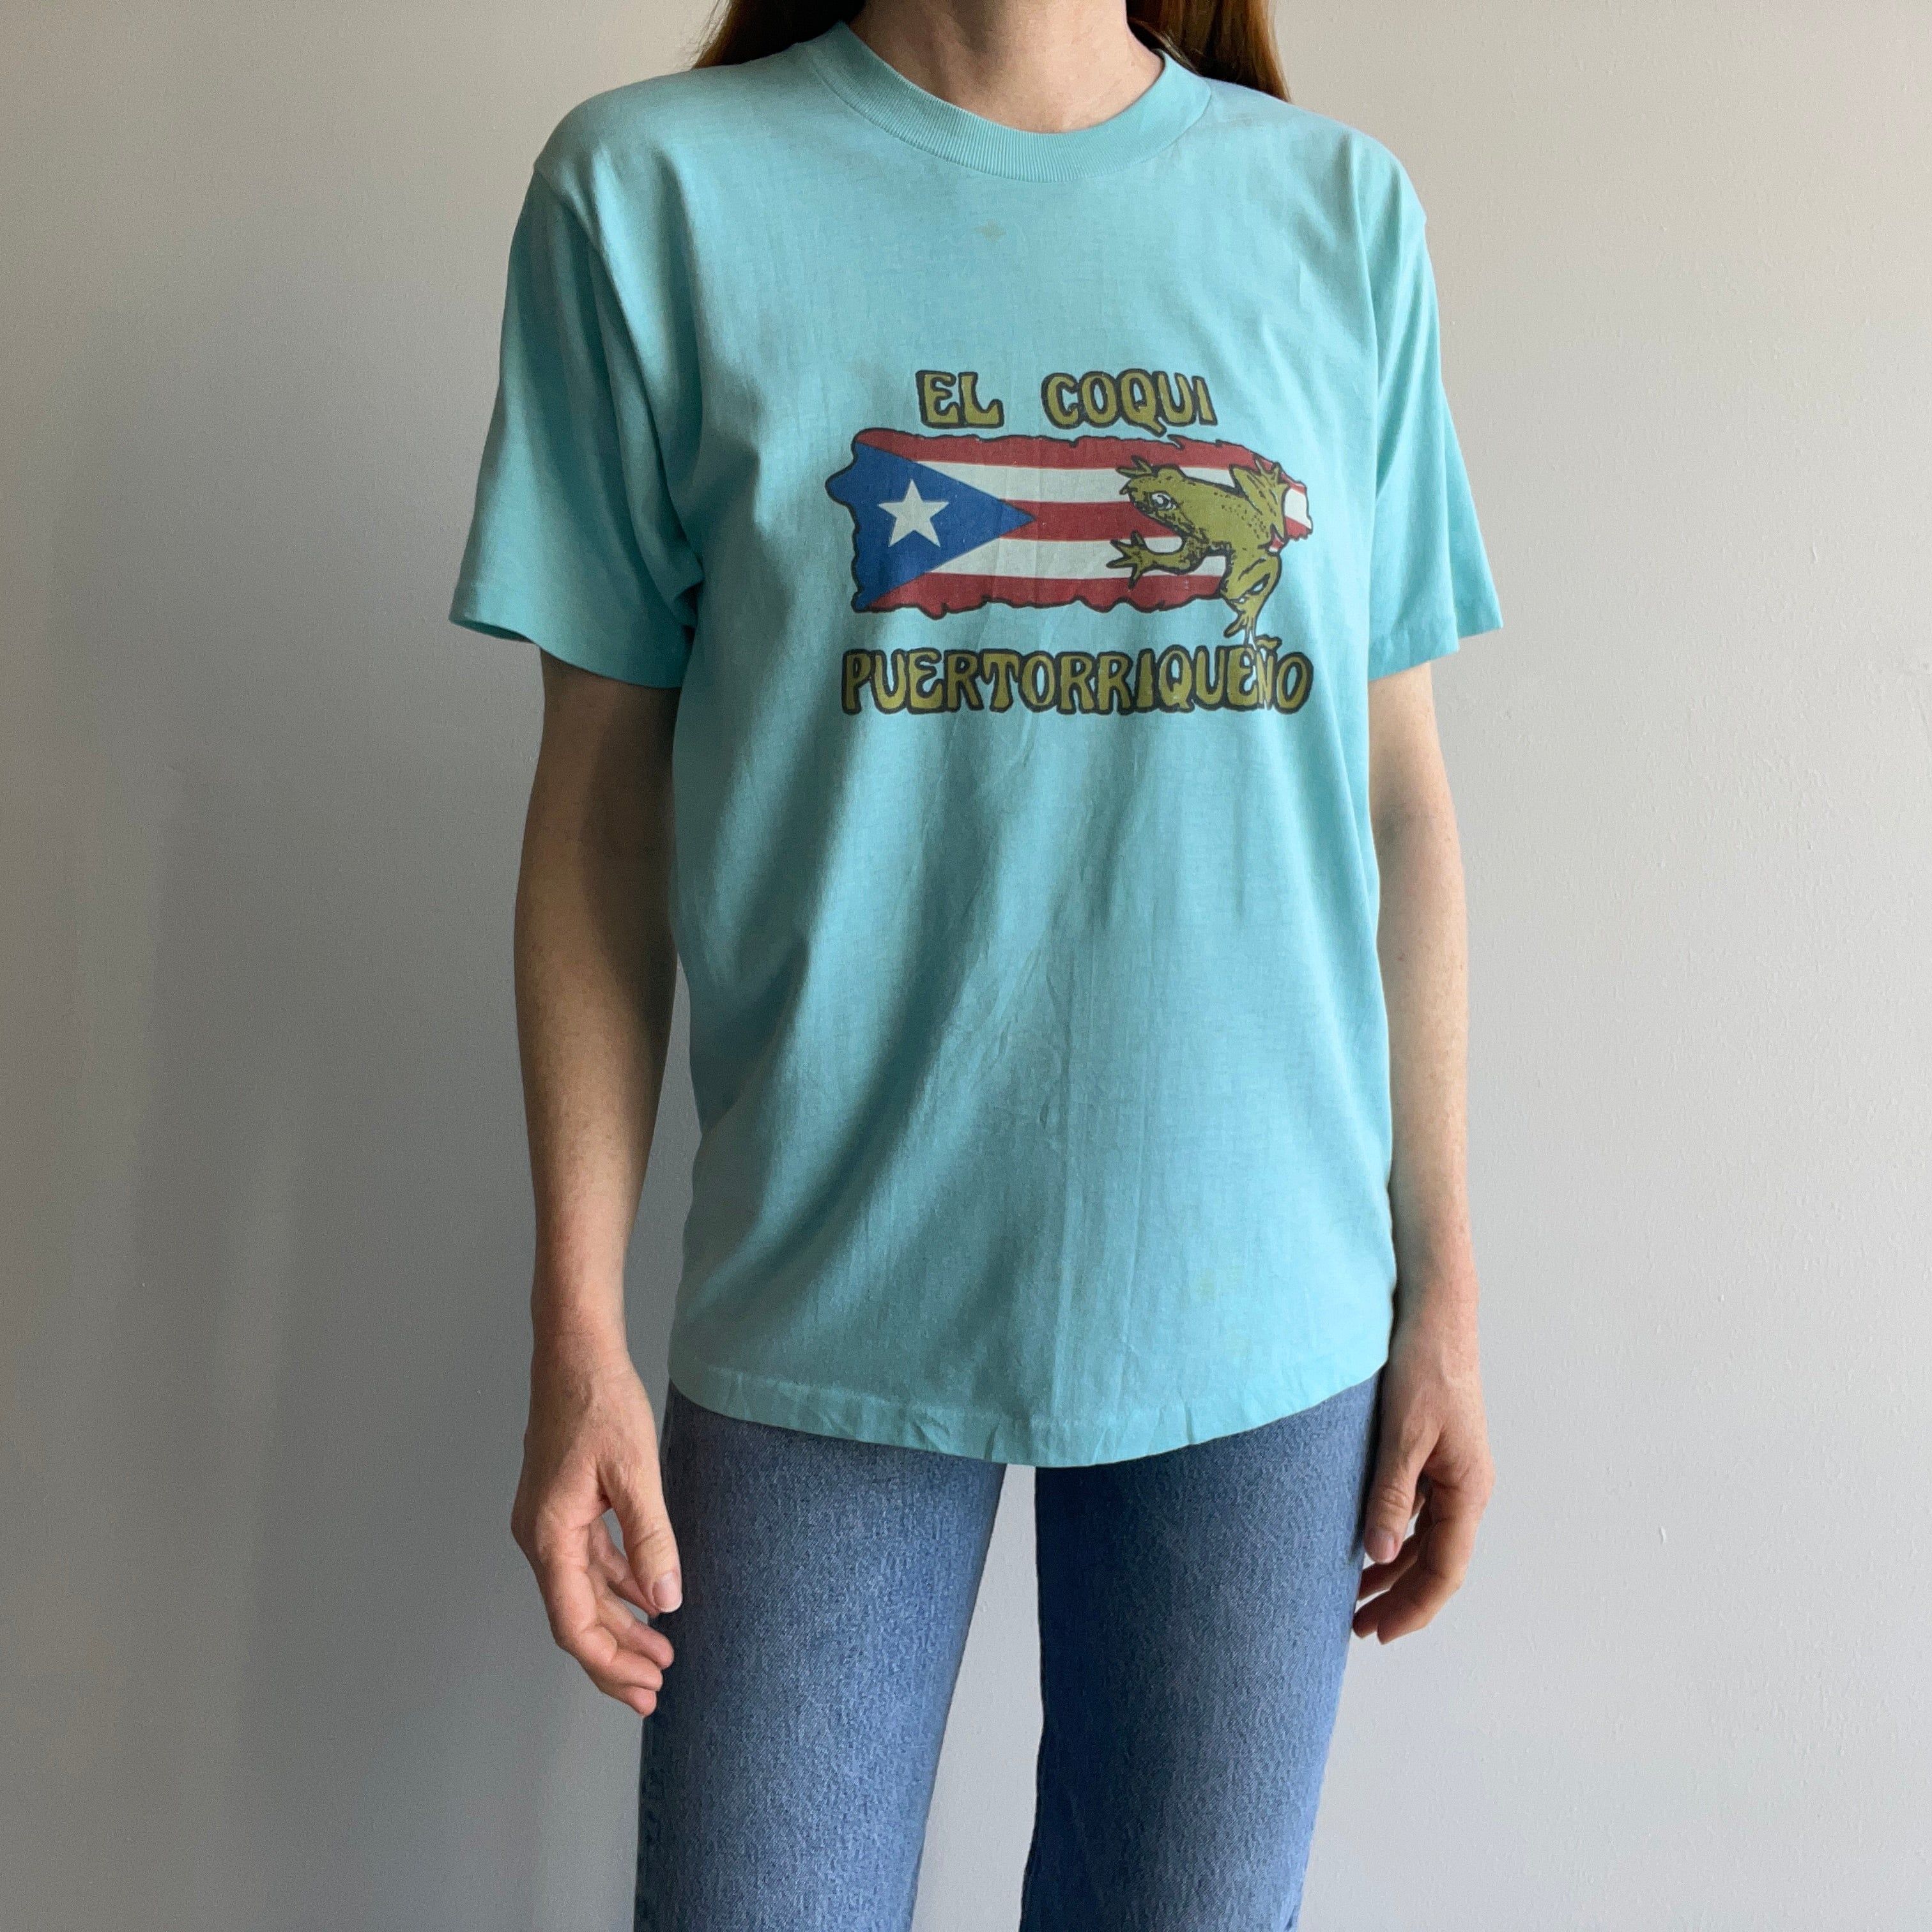 1980s El Coqui Puerto Rico T-Shirt That Pete (Backside) Worn Tucked In